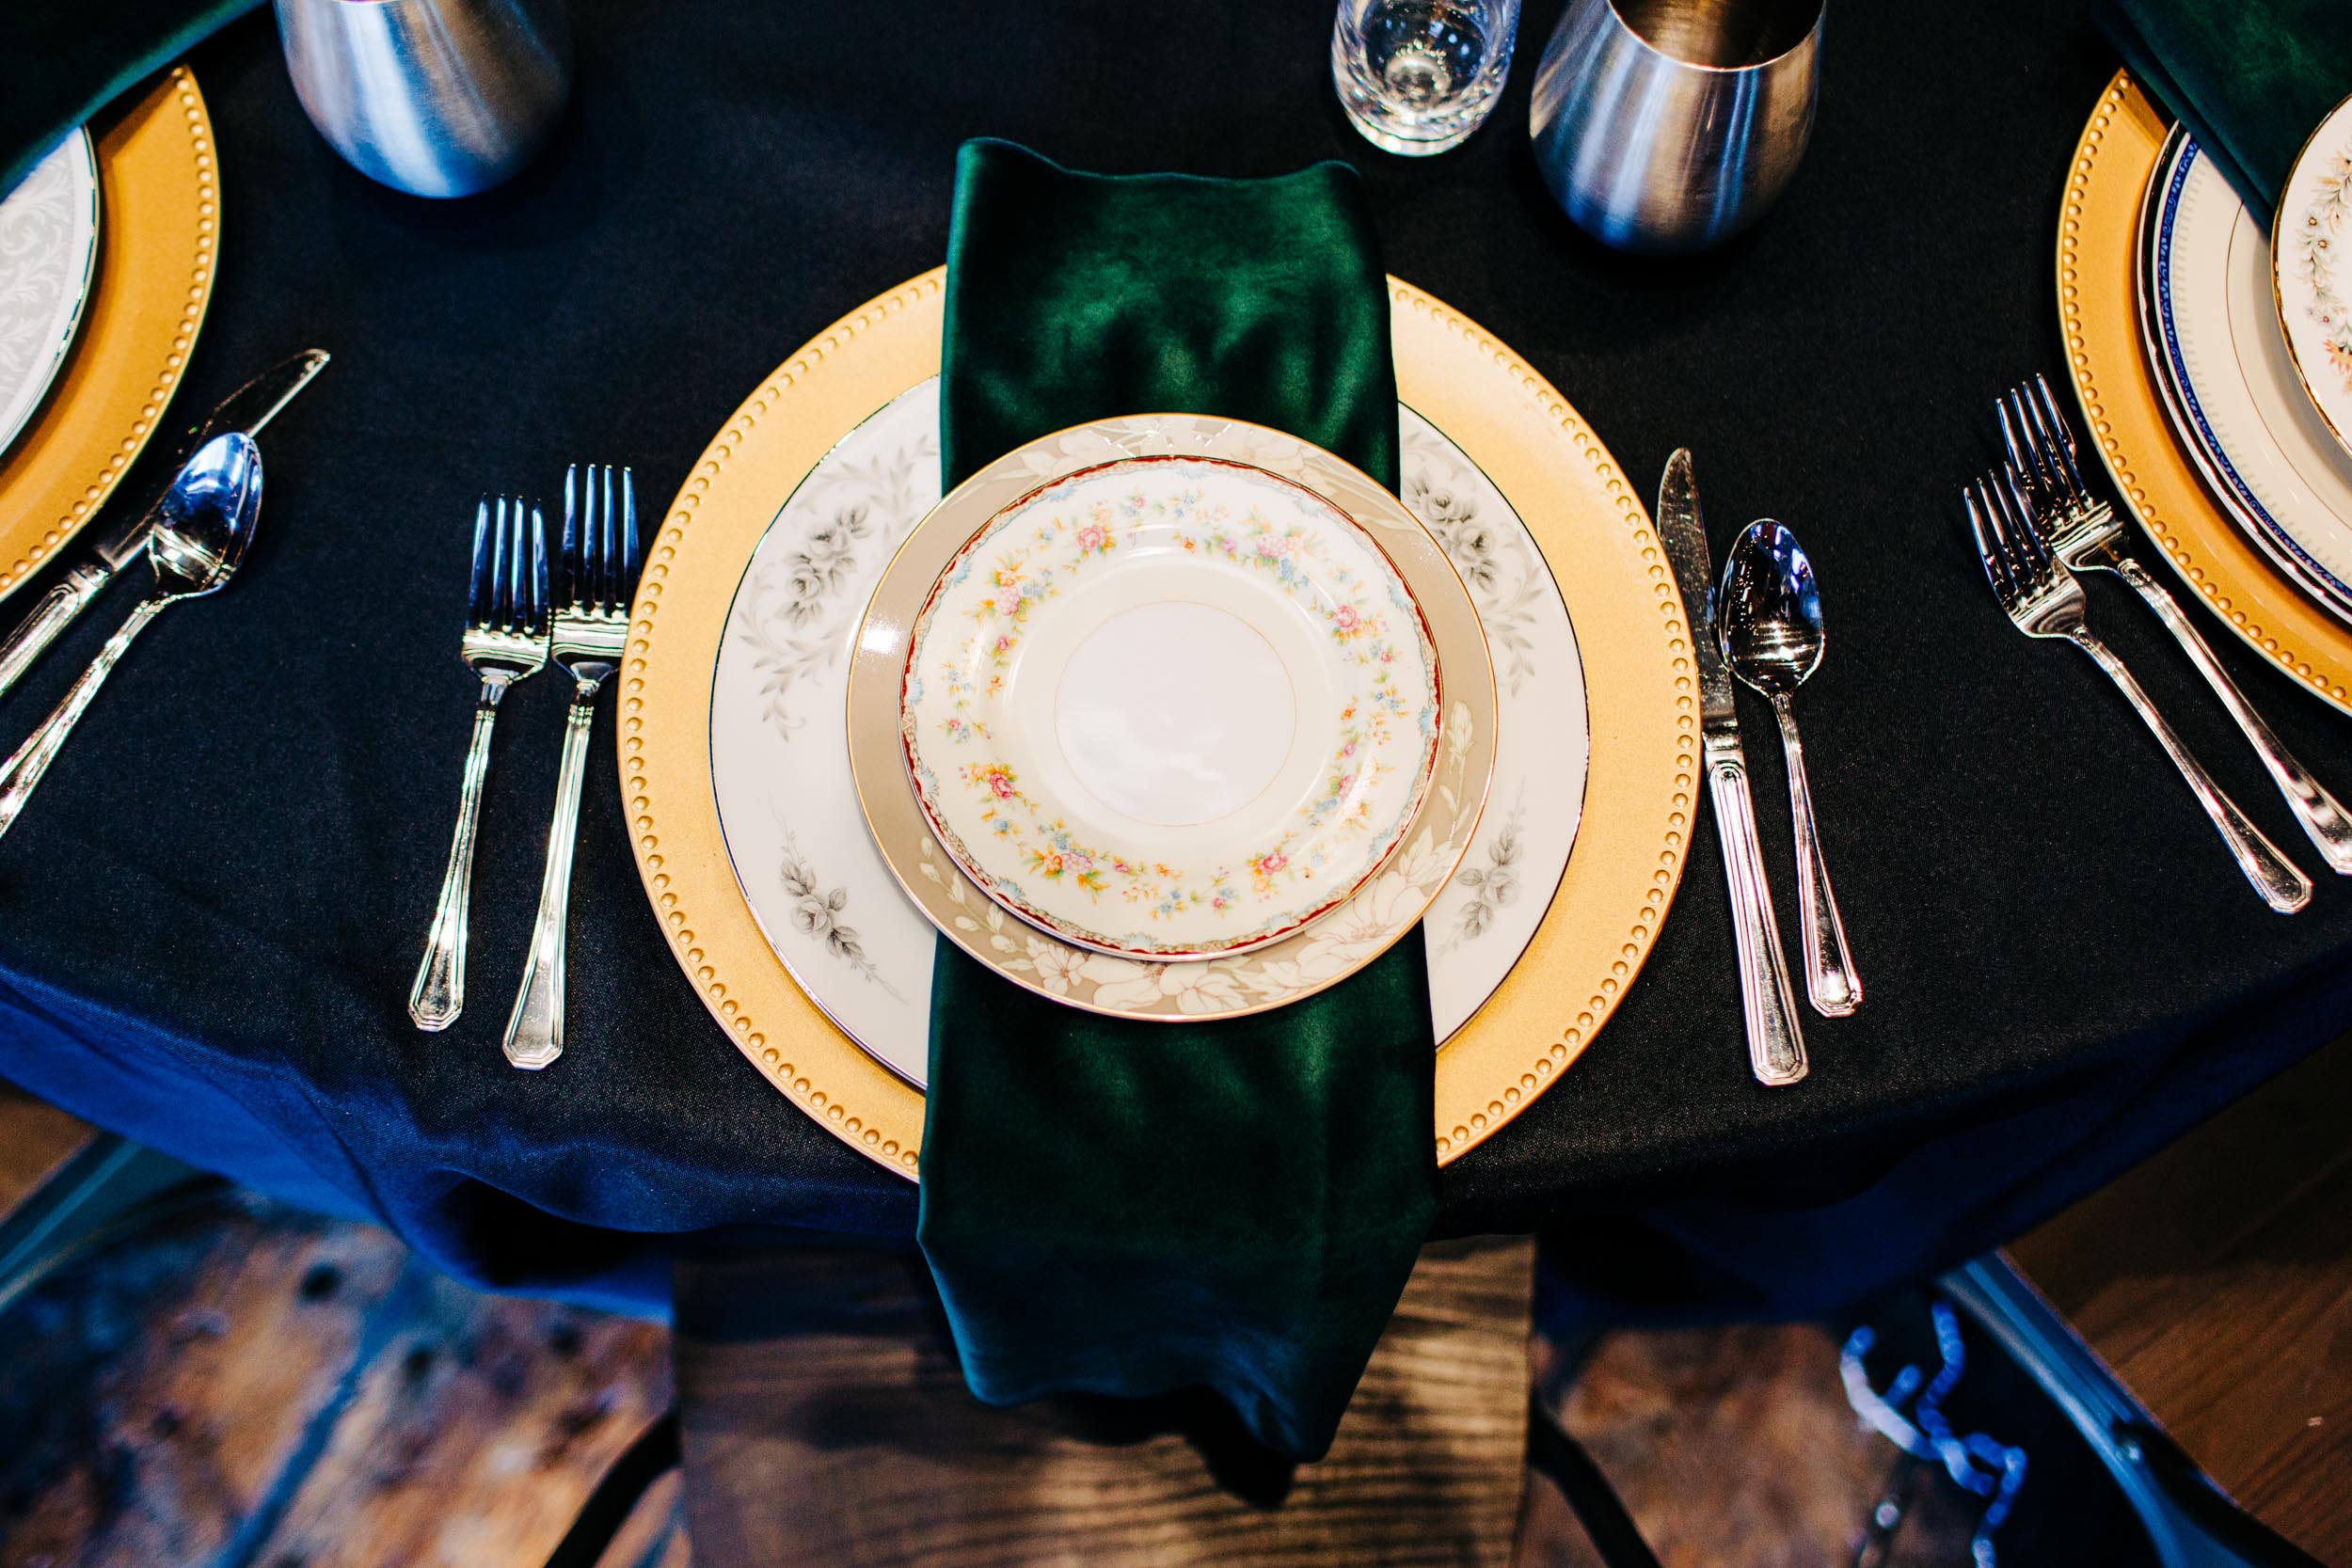 Place setting ideas for wedding